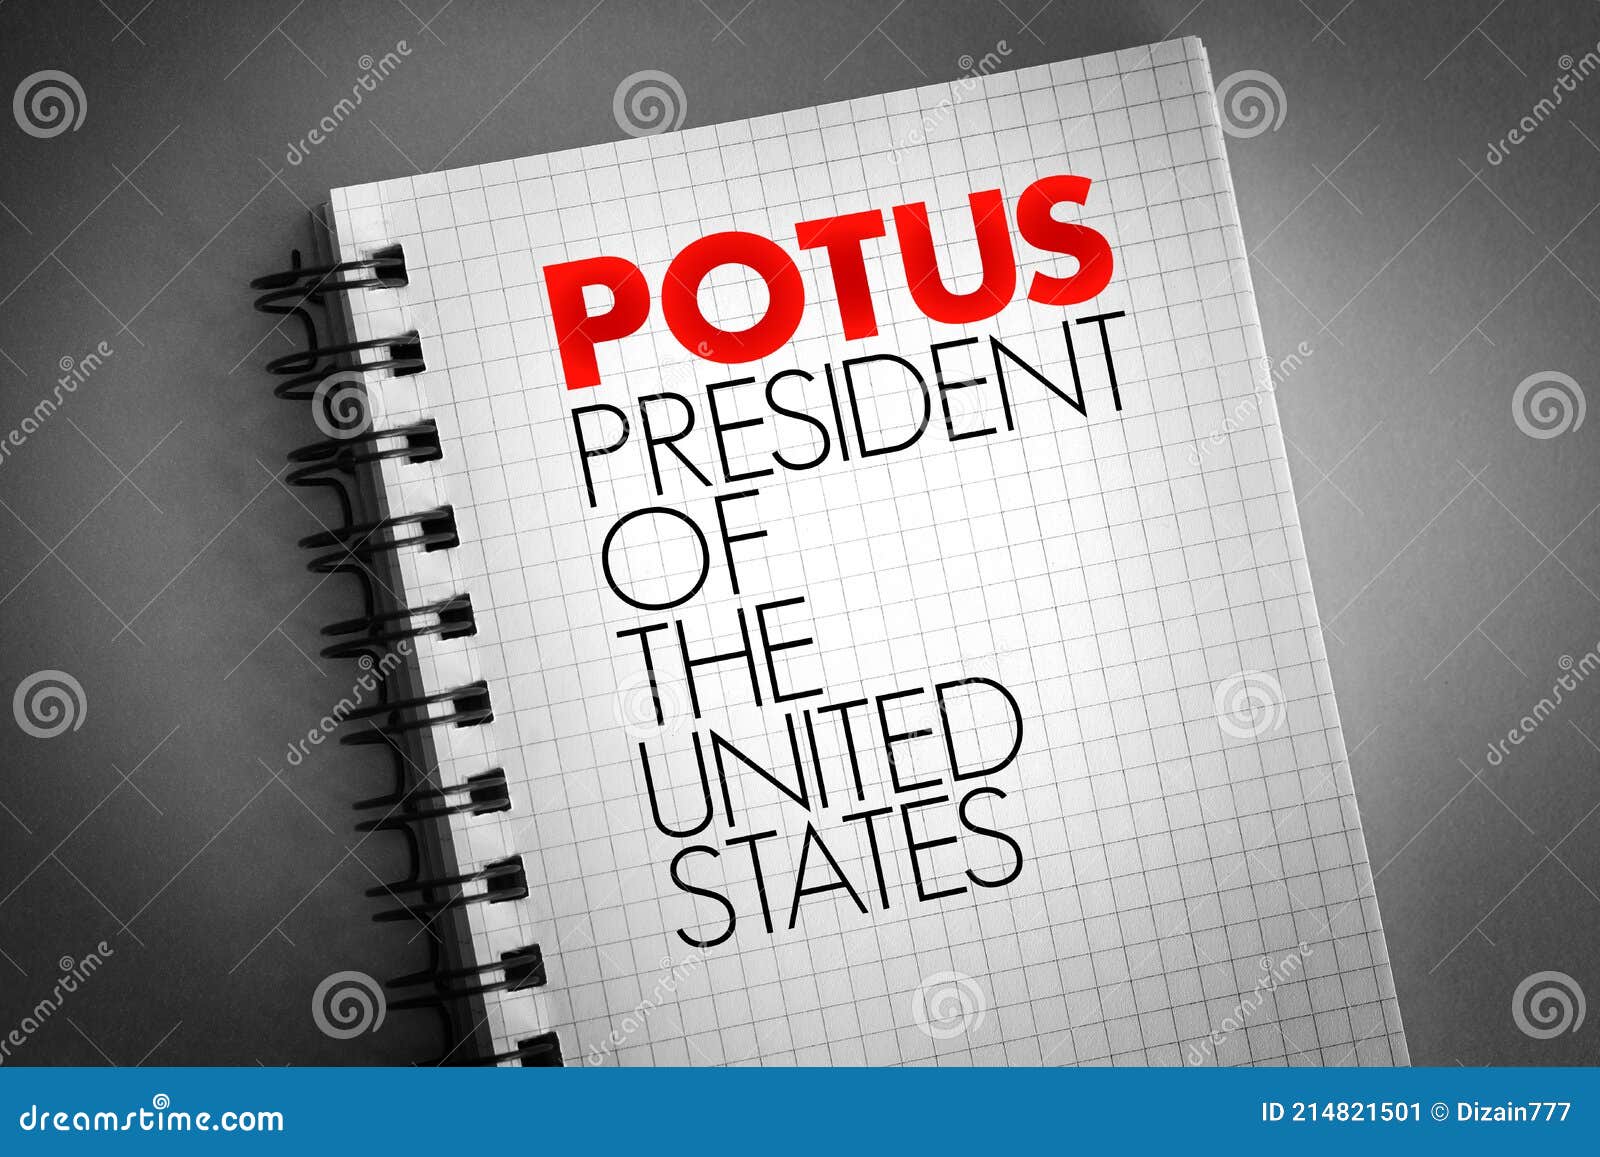 potus - president of the united states acronym on notepad, concept background